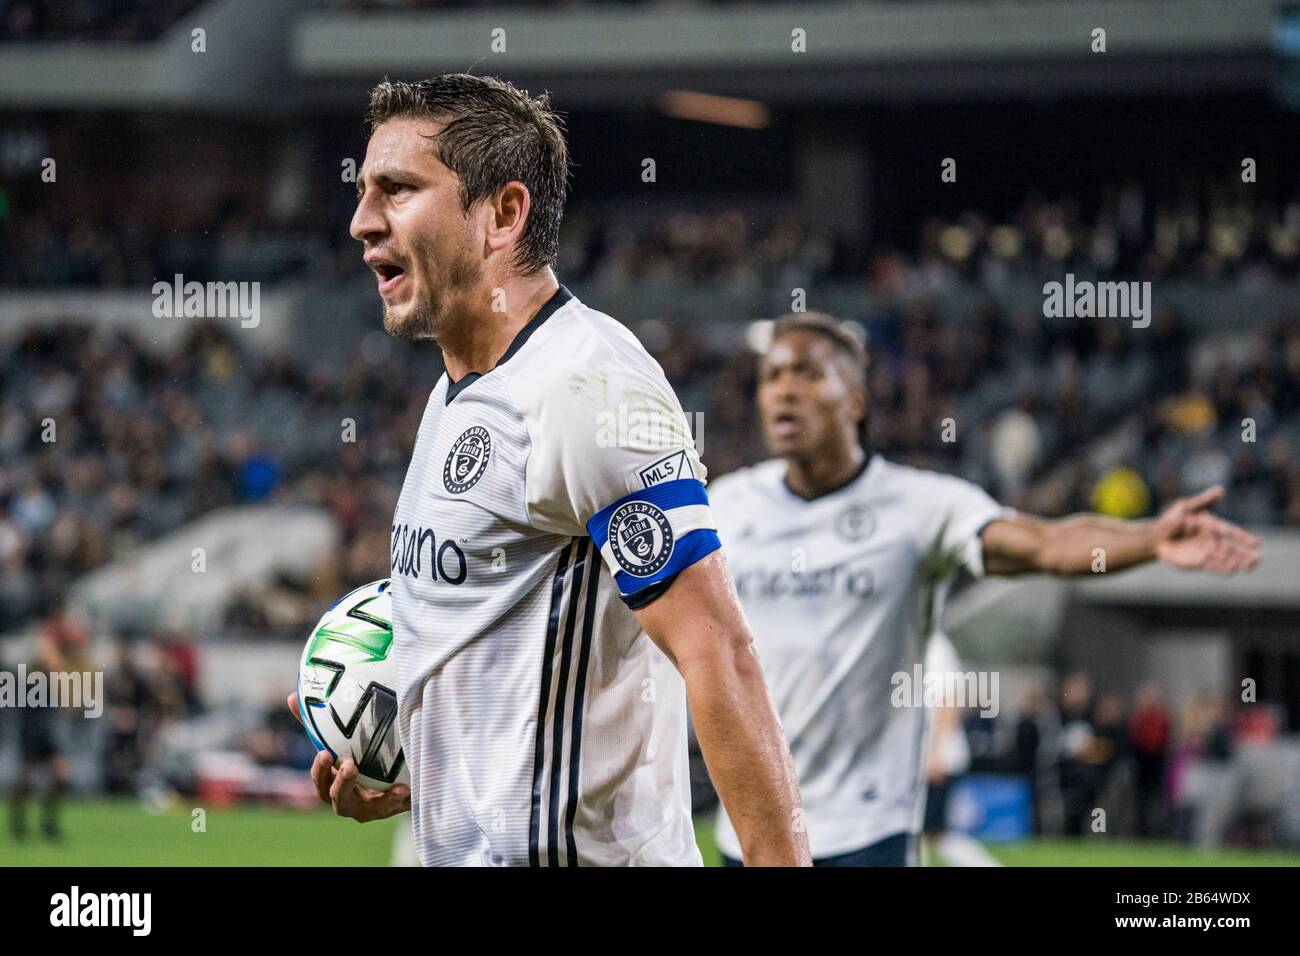 Philadelphia Union midfielder Alejandro Bedoya (11) reacts to a call during a MLS soccer matcha gainst the LAFC, Sunday, March 8, 2020, in Los Angeles, California, USA. (Photo by IOS/Espa-Images) Stock Photo